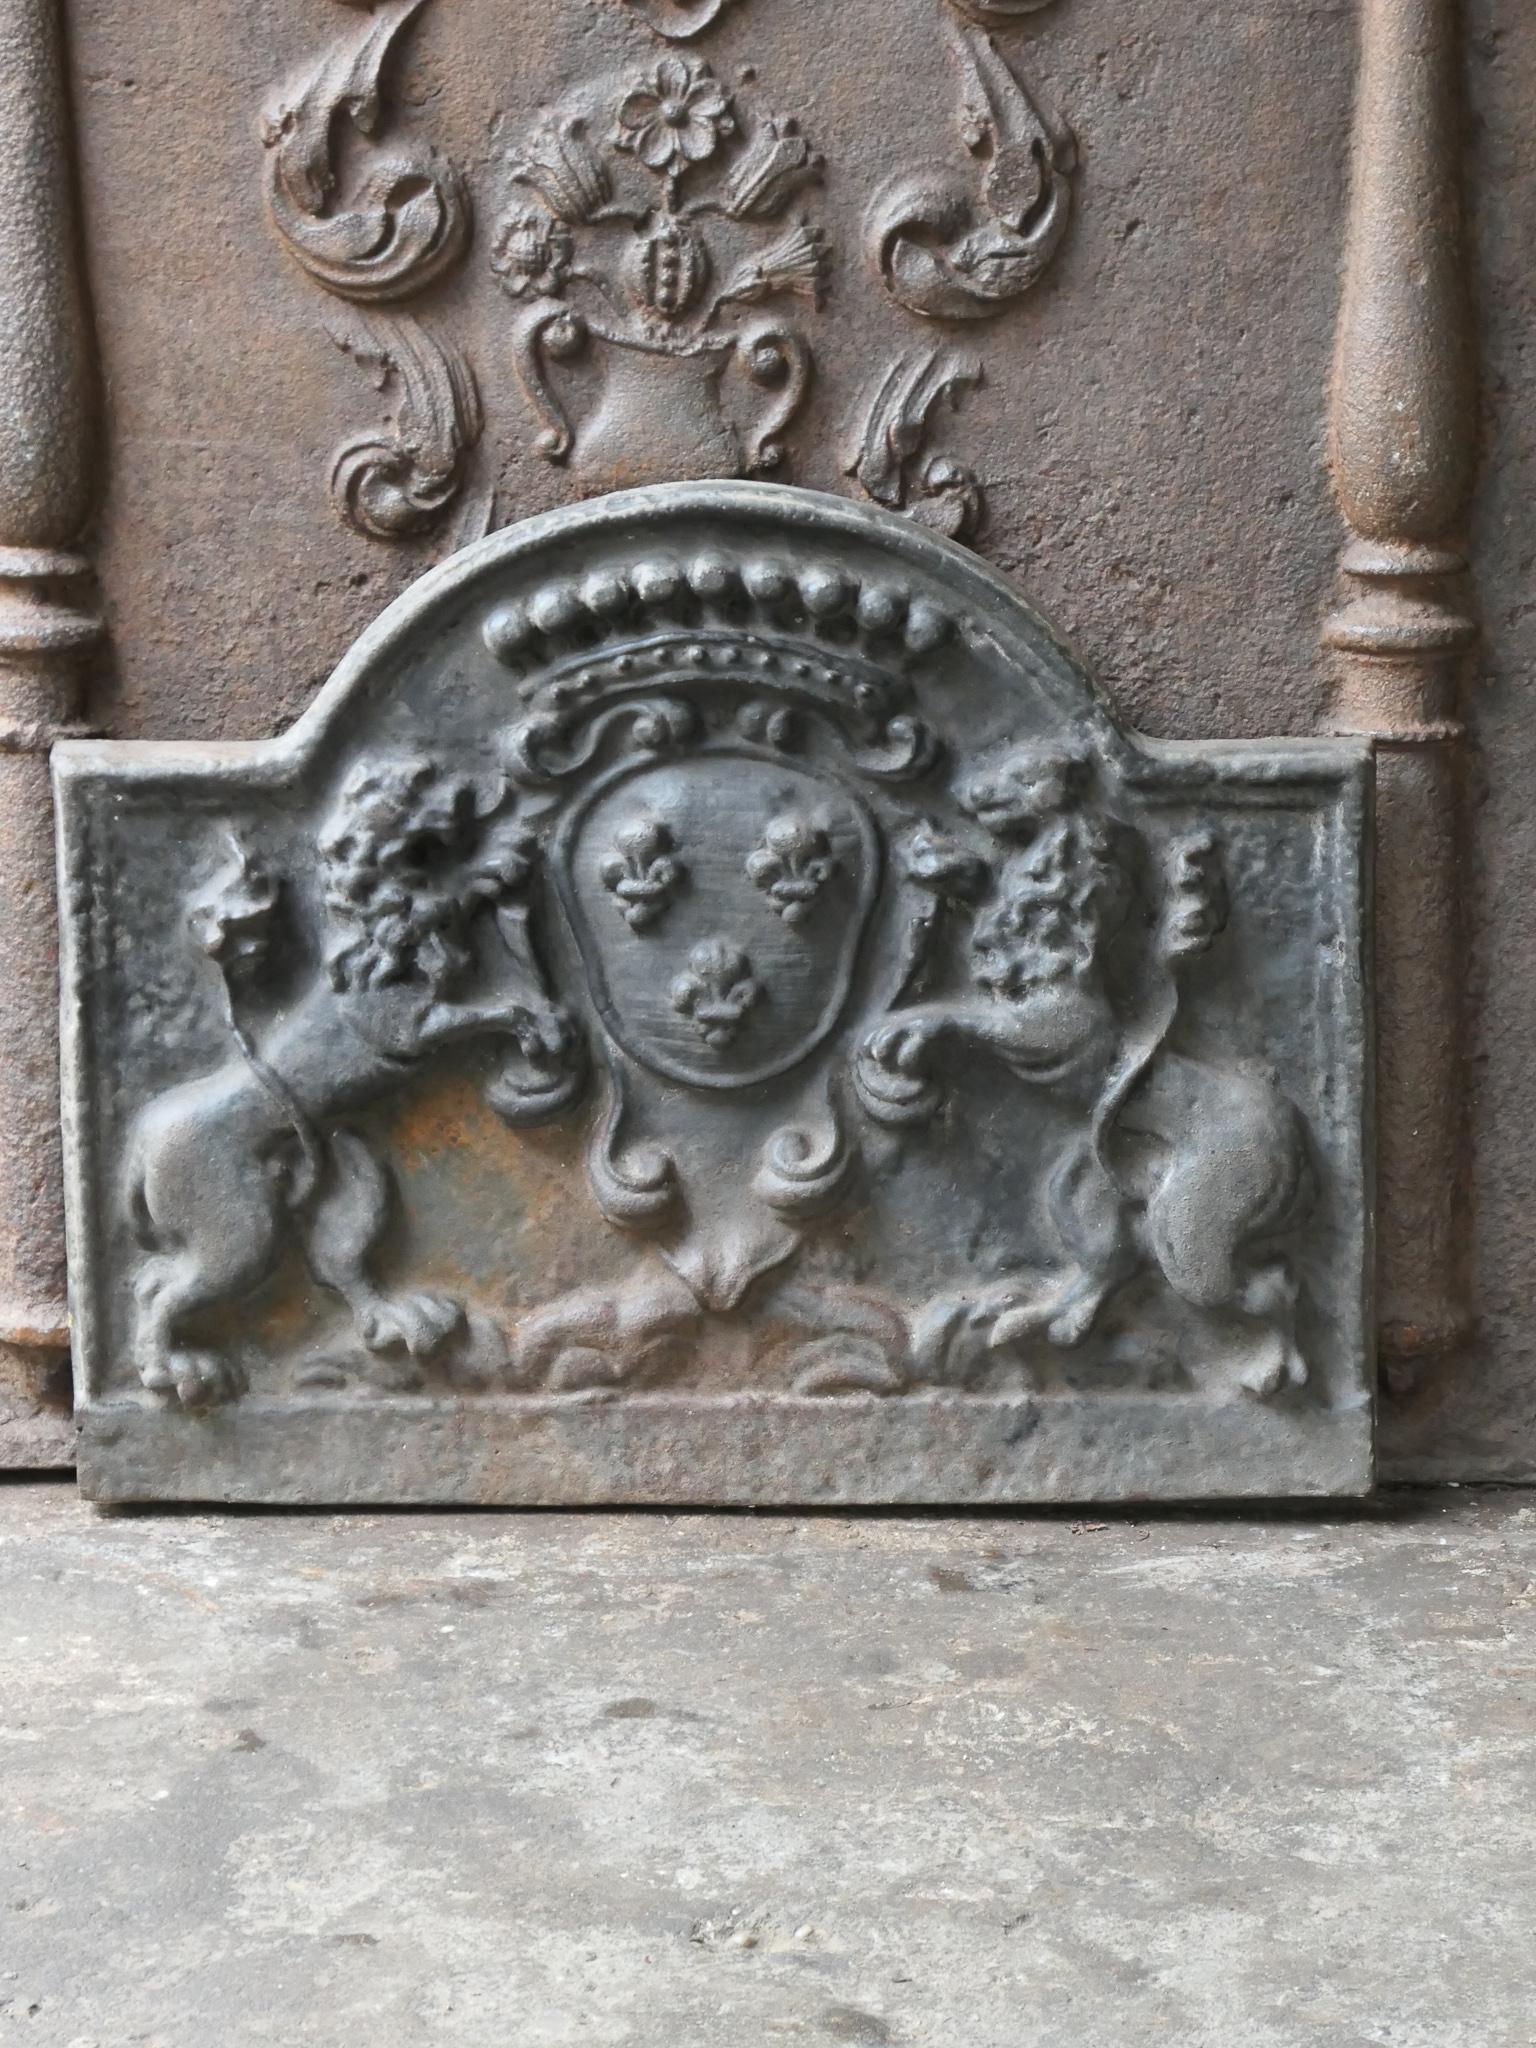 20th century French Louis XIV style fireback with the arms of France. This is the coat of arms of the House of Bourbon, an originally French royal house that became a major dynasty in Europe. It delivered kings for Spain (Navarra), France, both